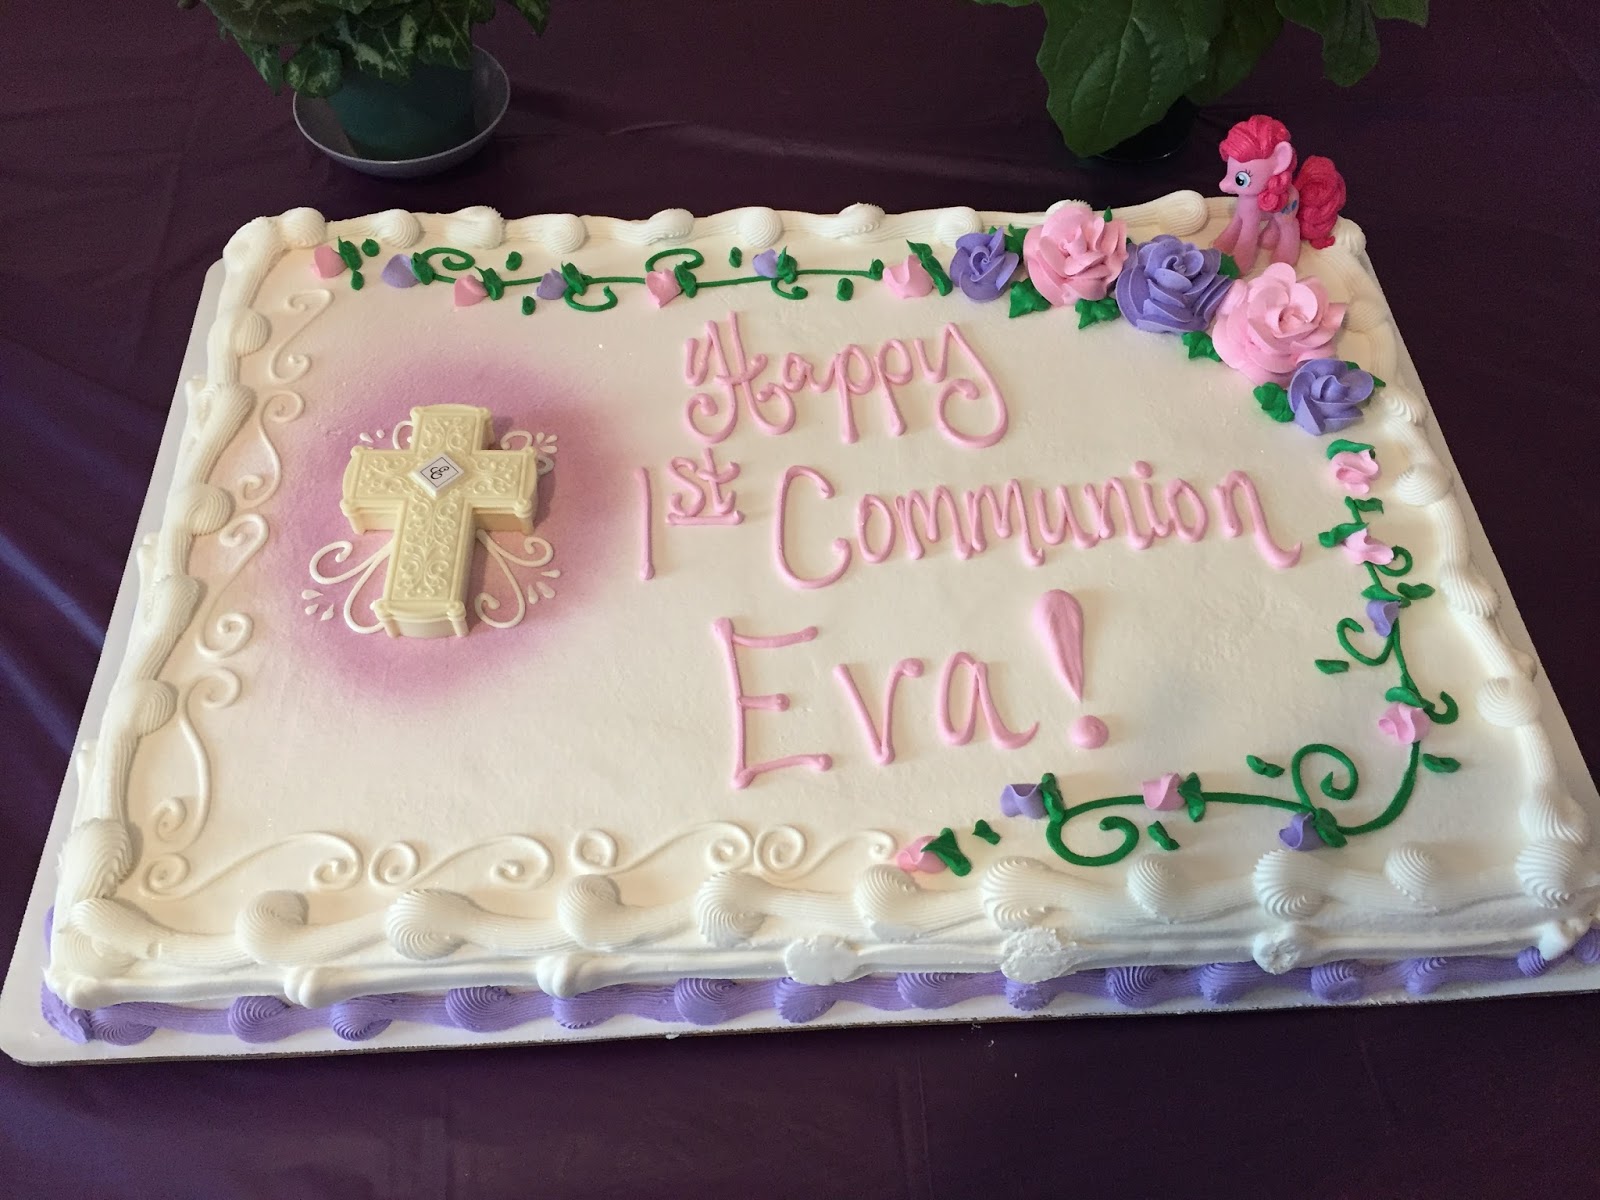 The Kerrie Show: How to Have a Fabulous First Communion #CatholicHippieMom